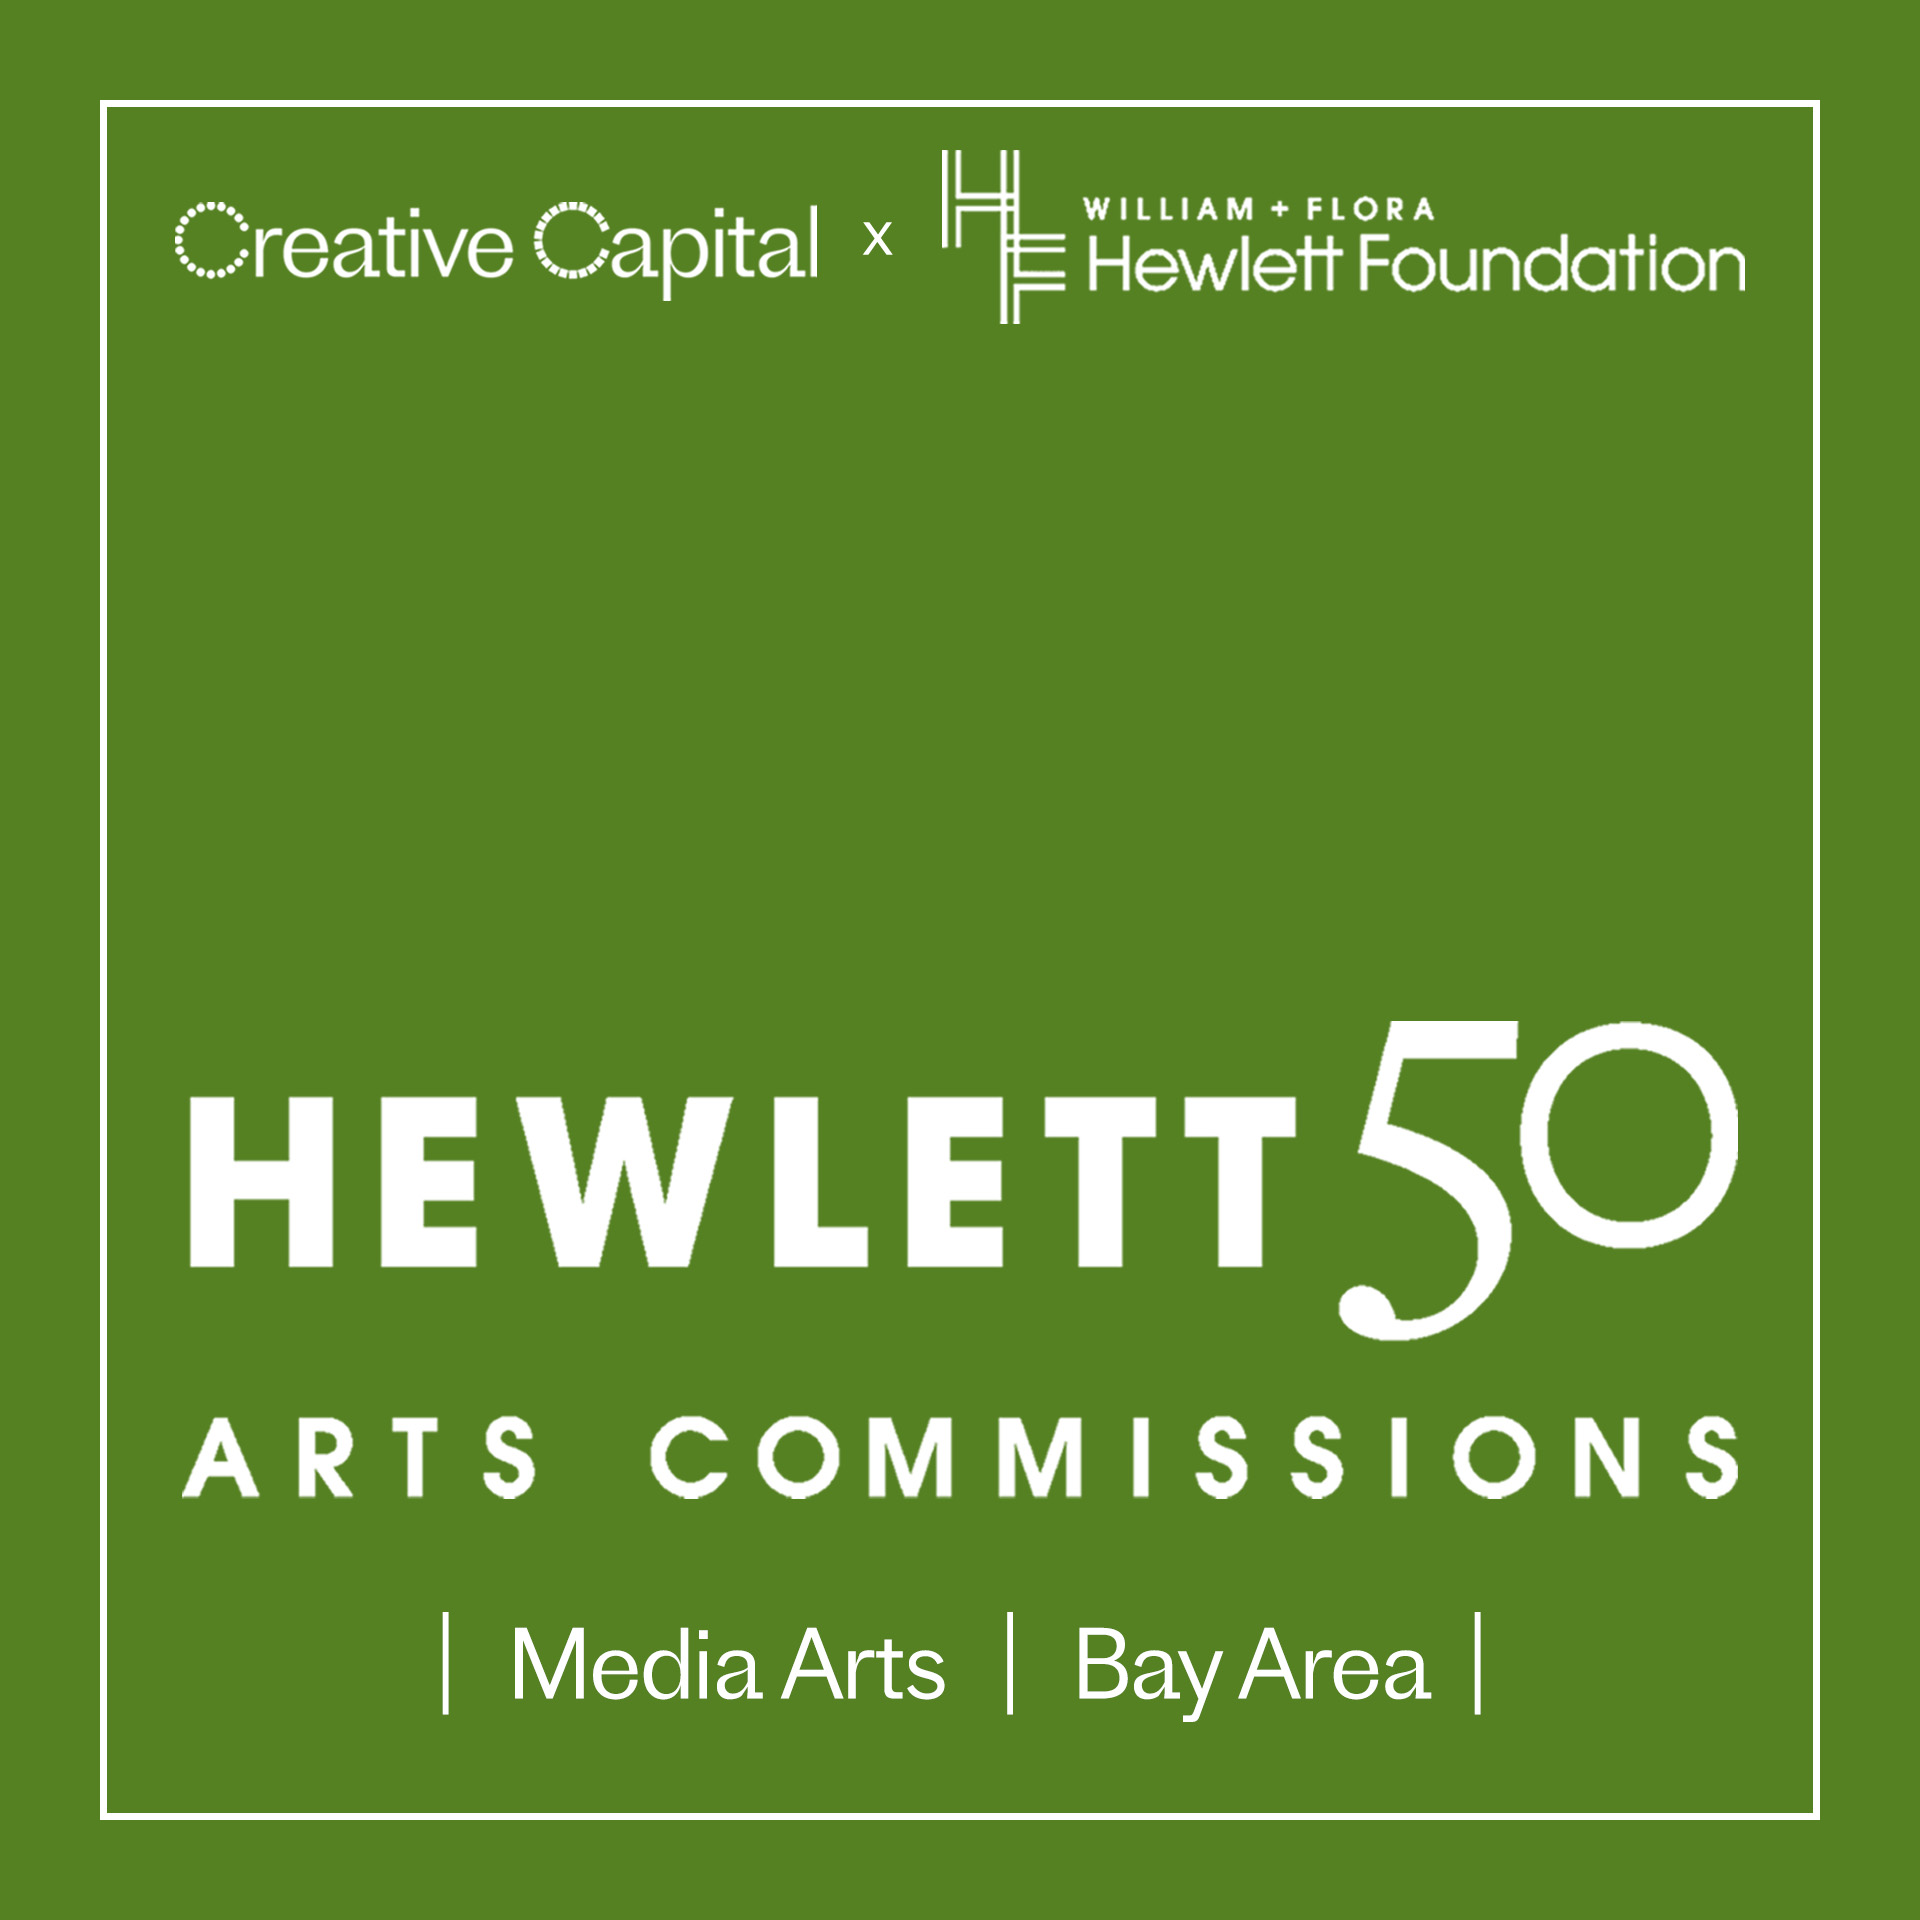 About Hewlett 50 Arts Commissions